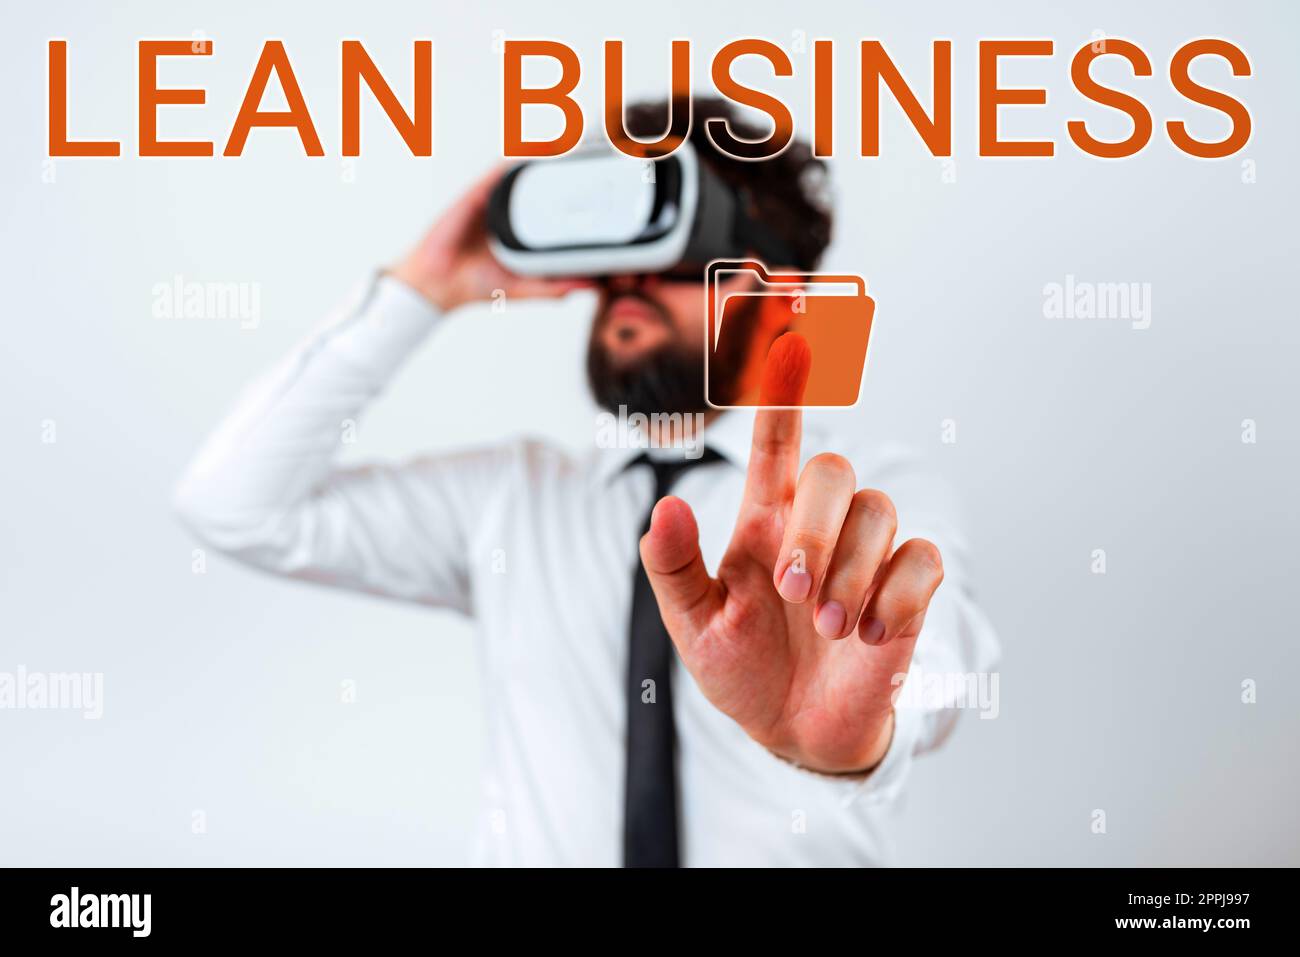 Sign displaying Lean Business. Business concept improvement of waste minimization without sacrificing productivity Stock Photo